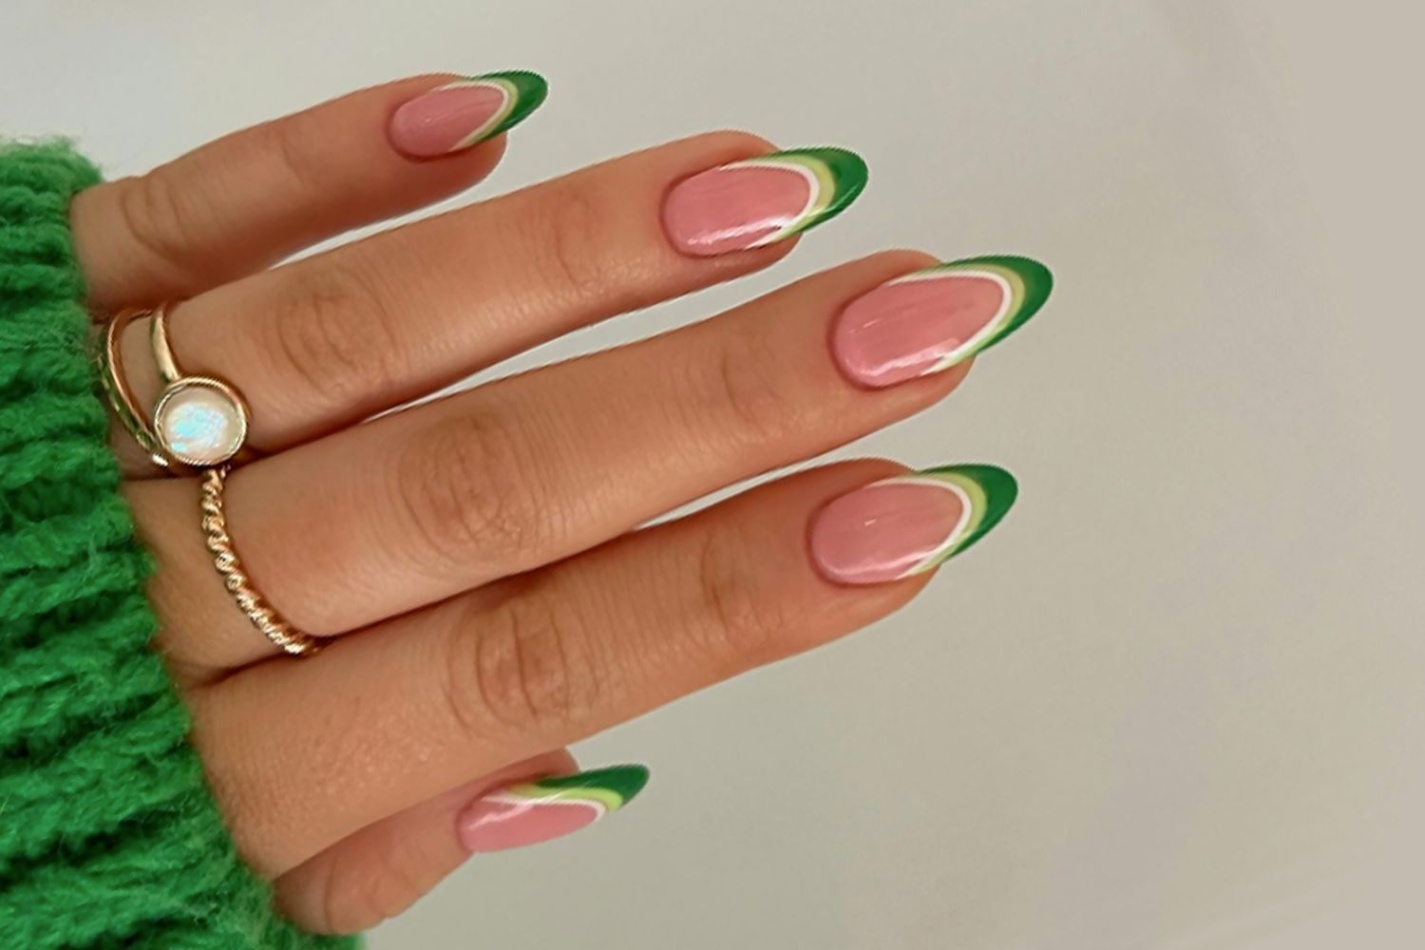 almond shaped nails designs Niche Utama Home www.realsimple